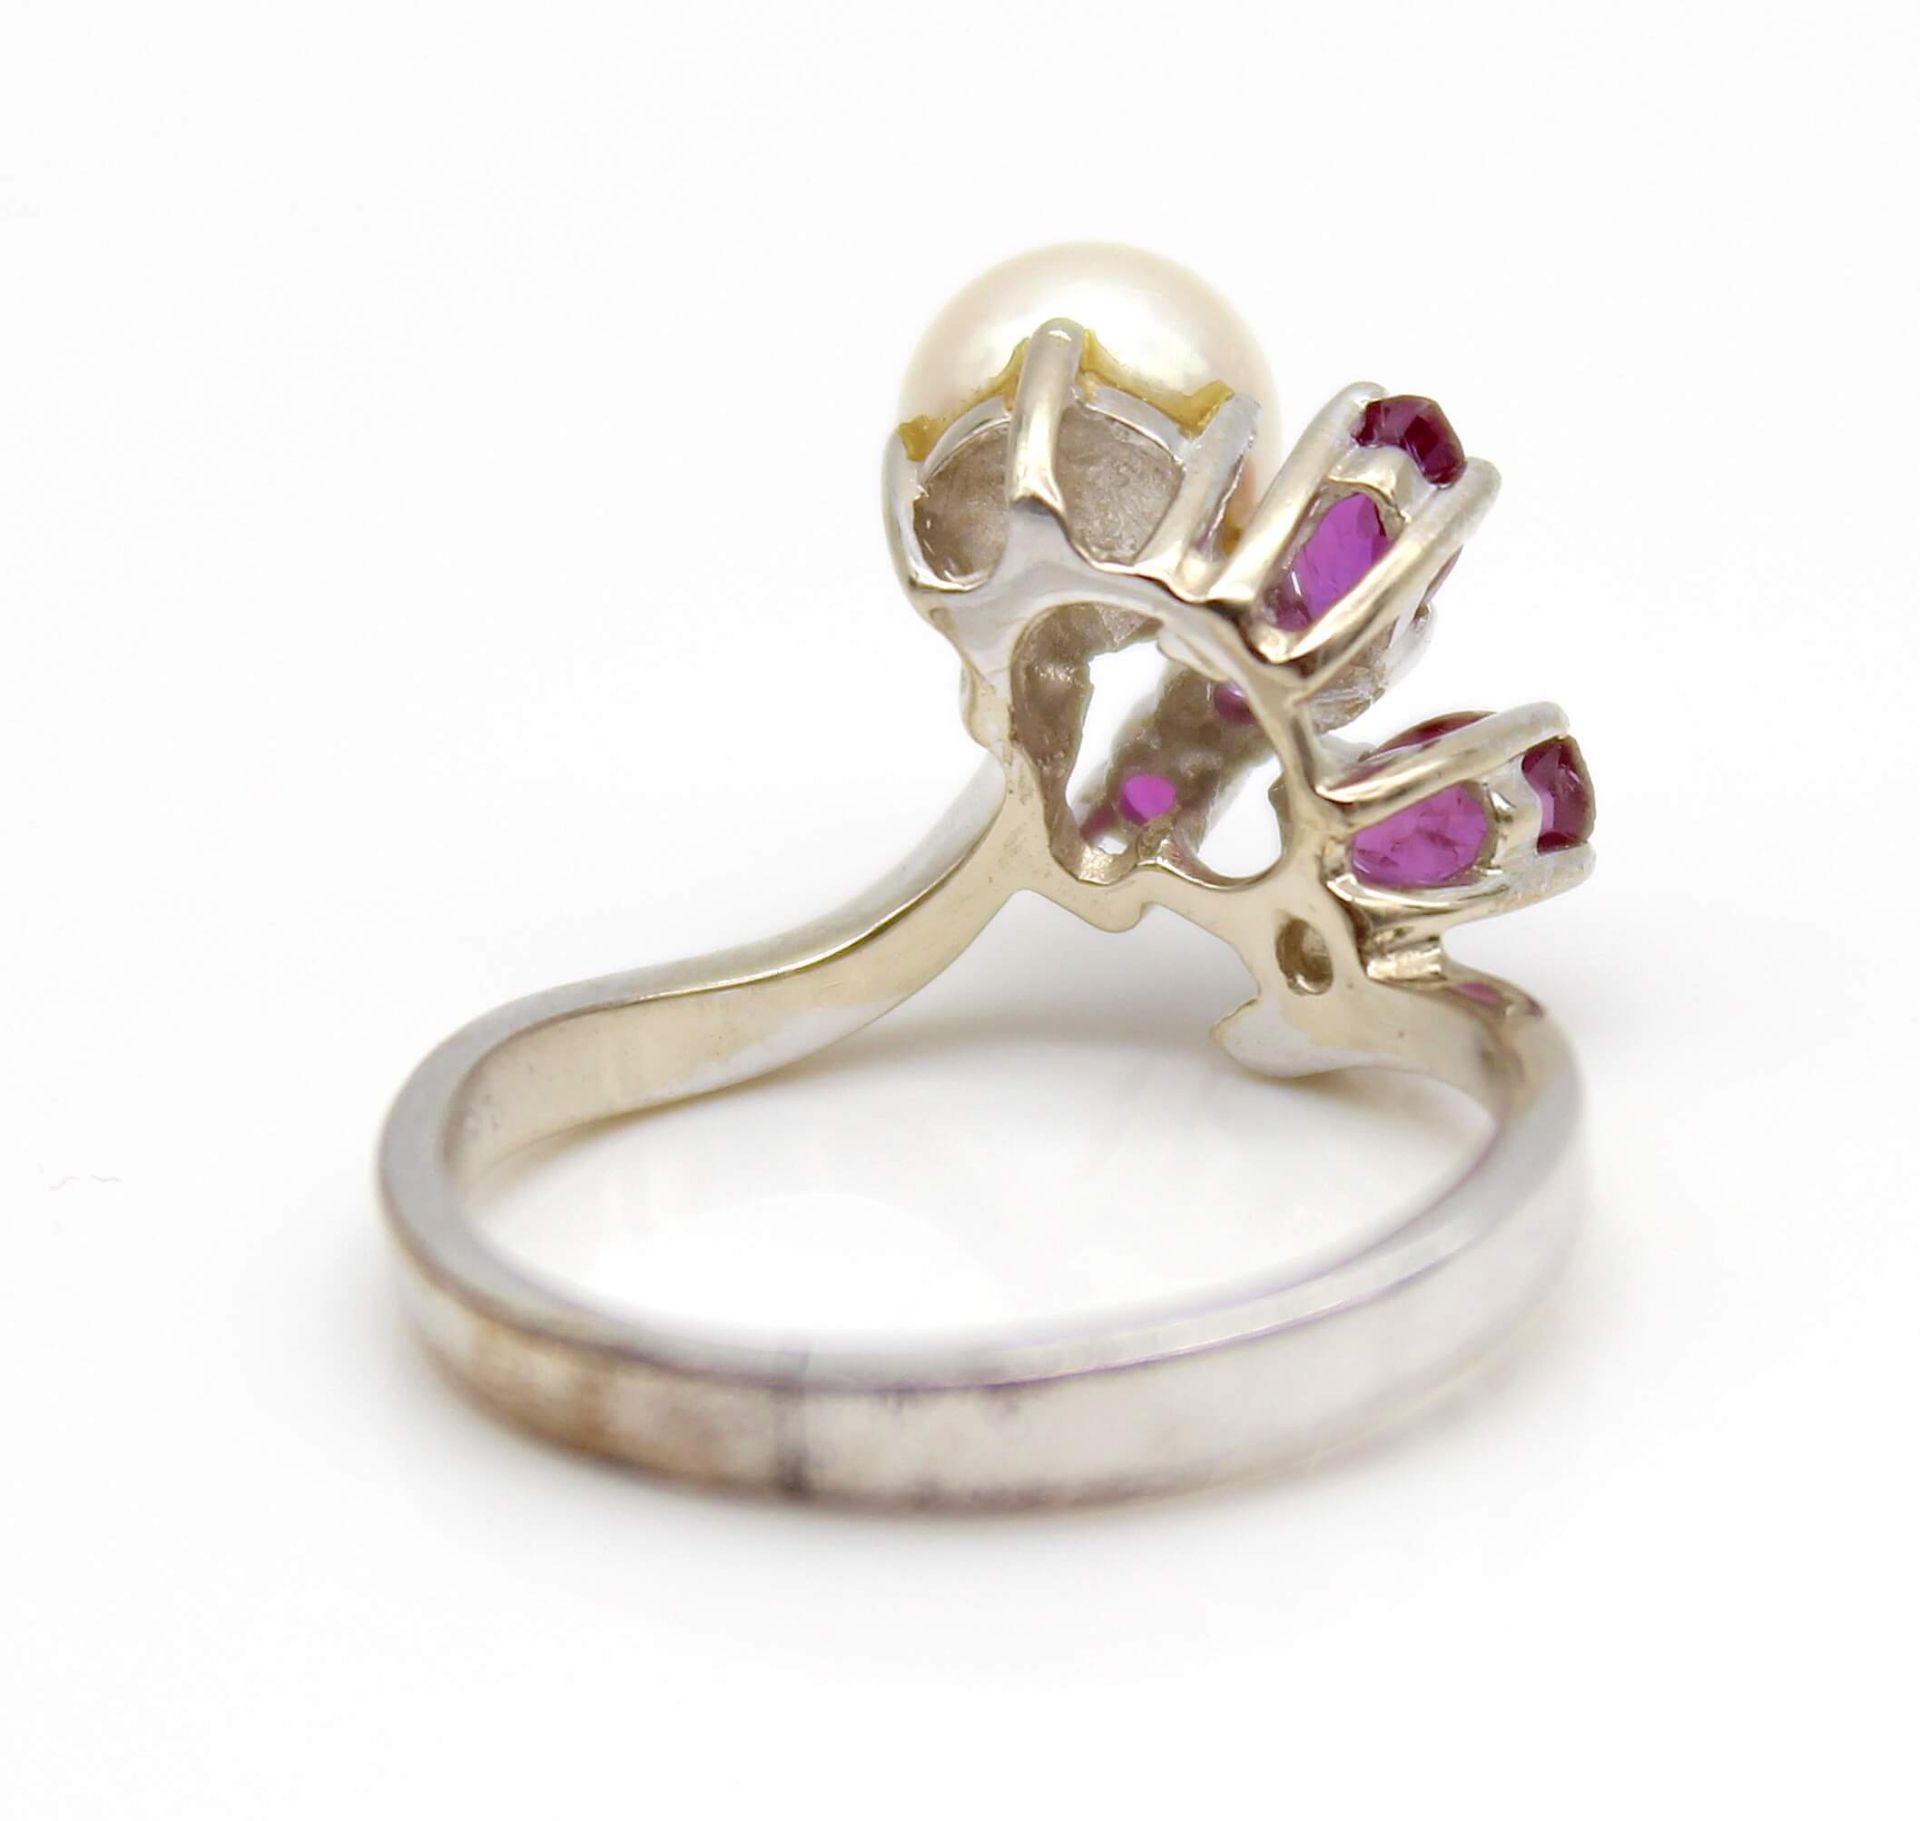 Ring with cultured pearl and rubies - Image 3 of 3